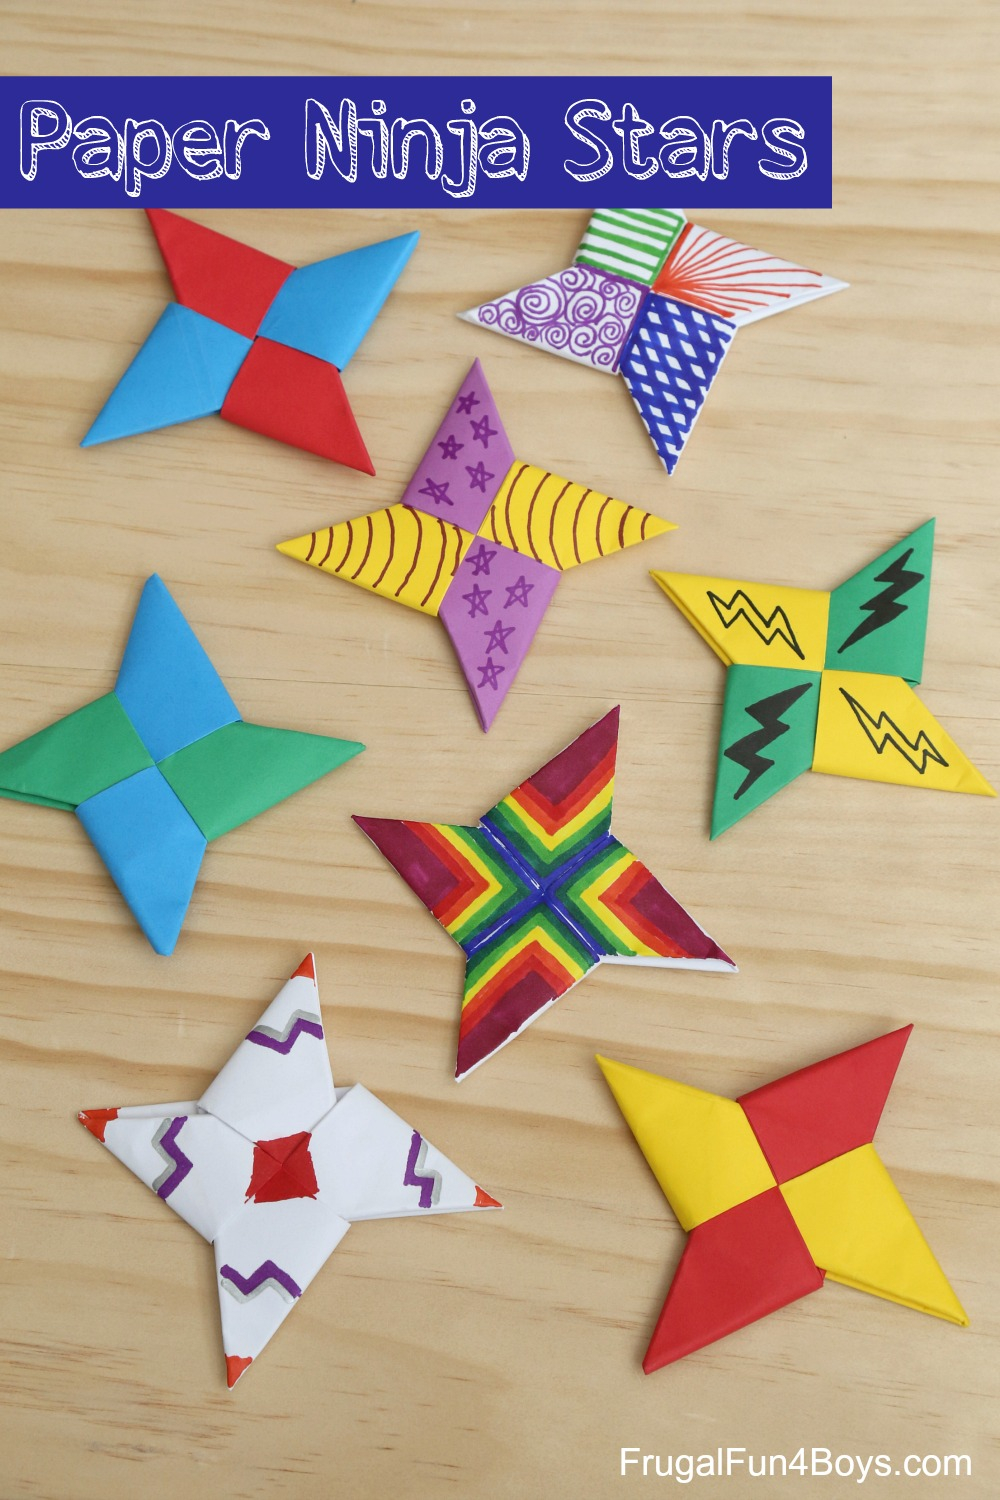 How To Make An Origami Star How To Fold Paper Ninja Stars Frugal Fun For Boys And Girls